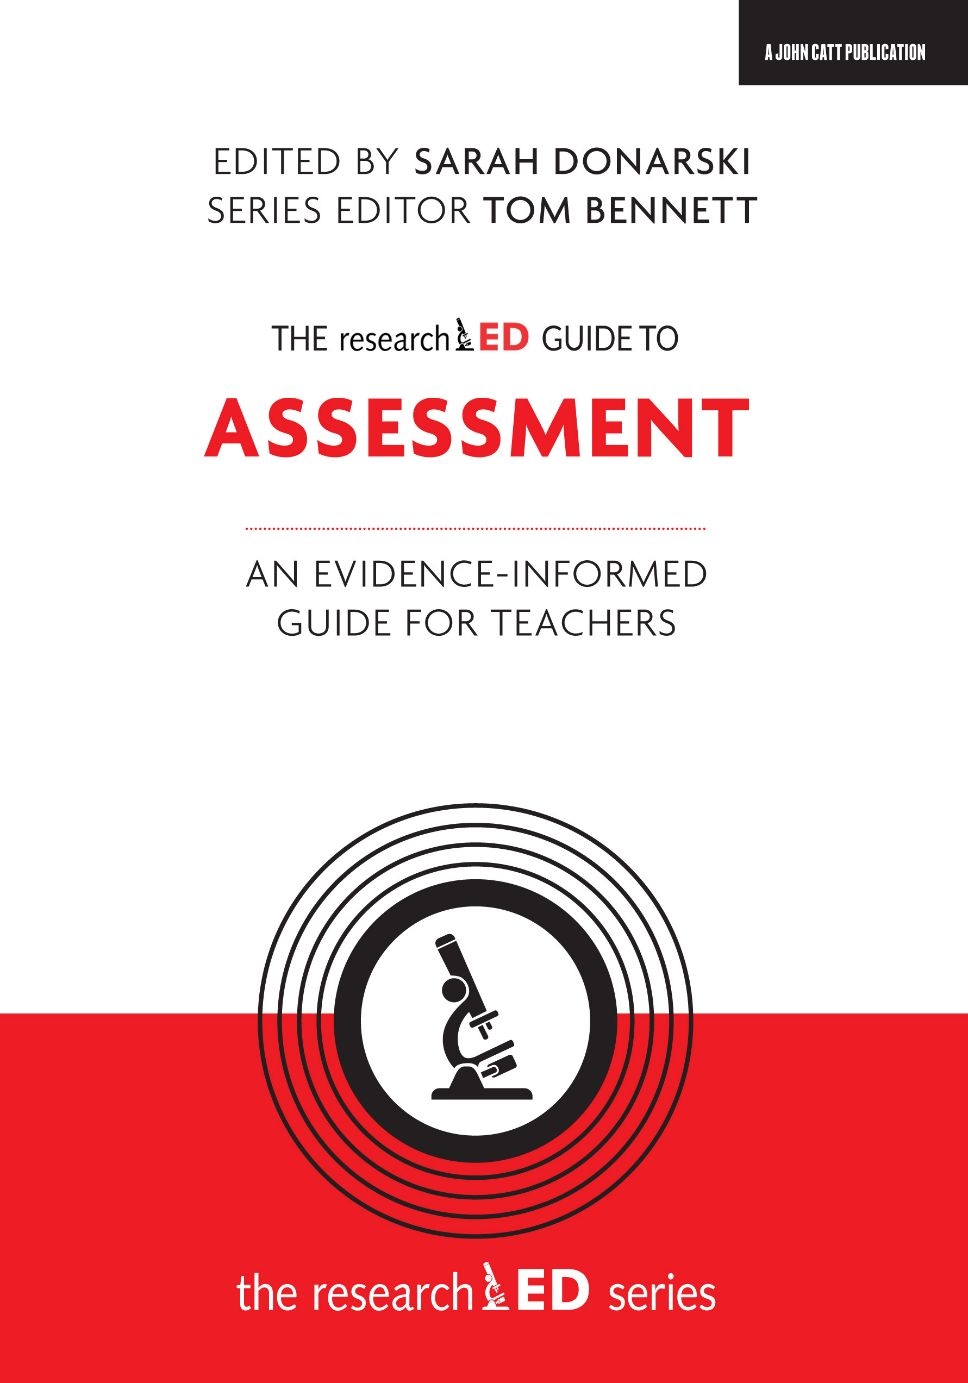 Featured image for “The researchED Guide to Assessment: An evidence-informed guide for teachers”